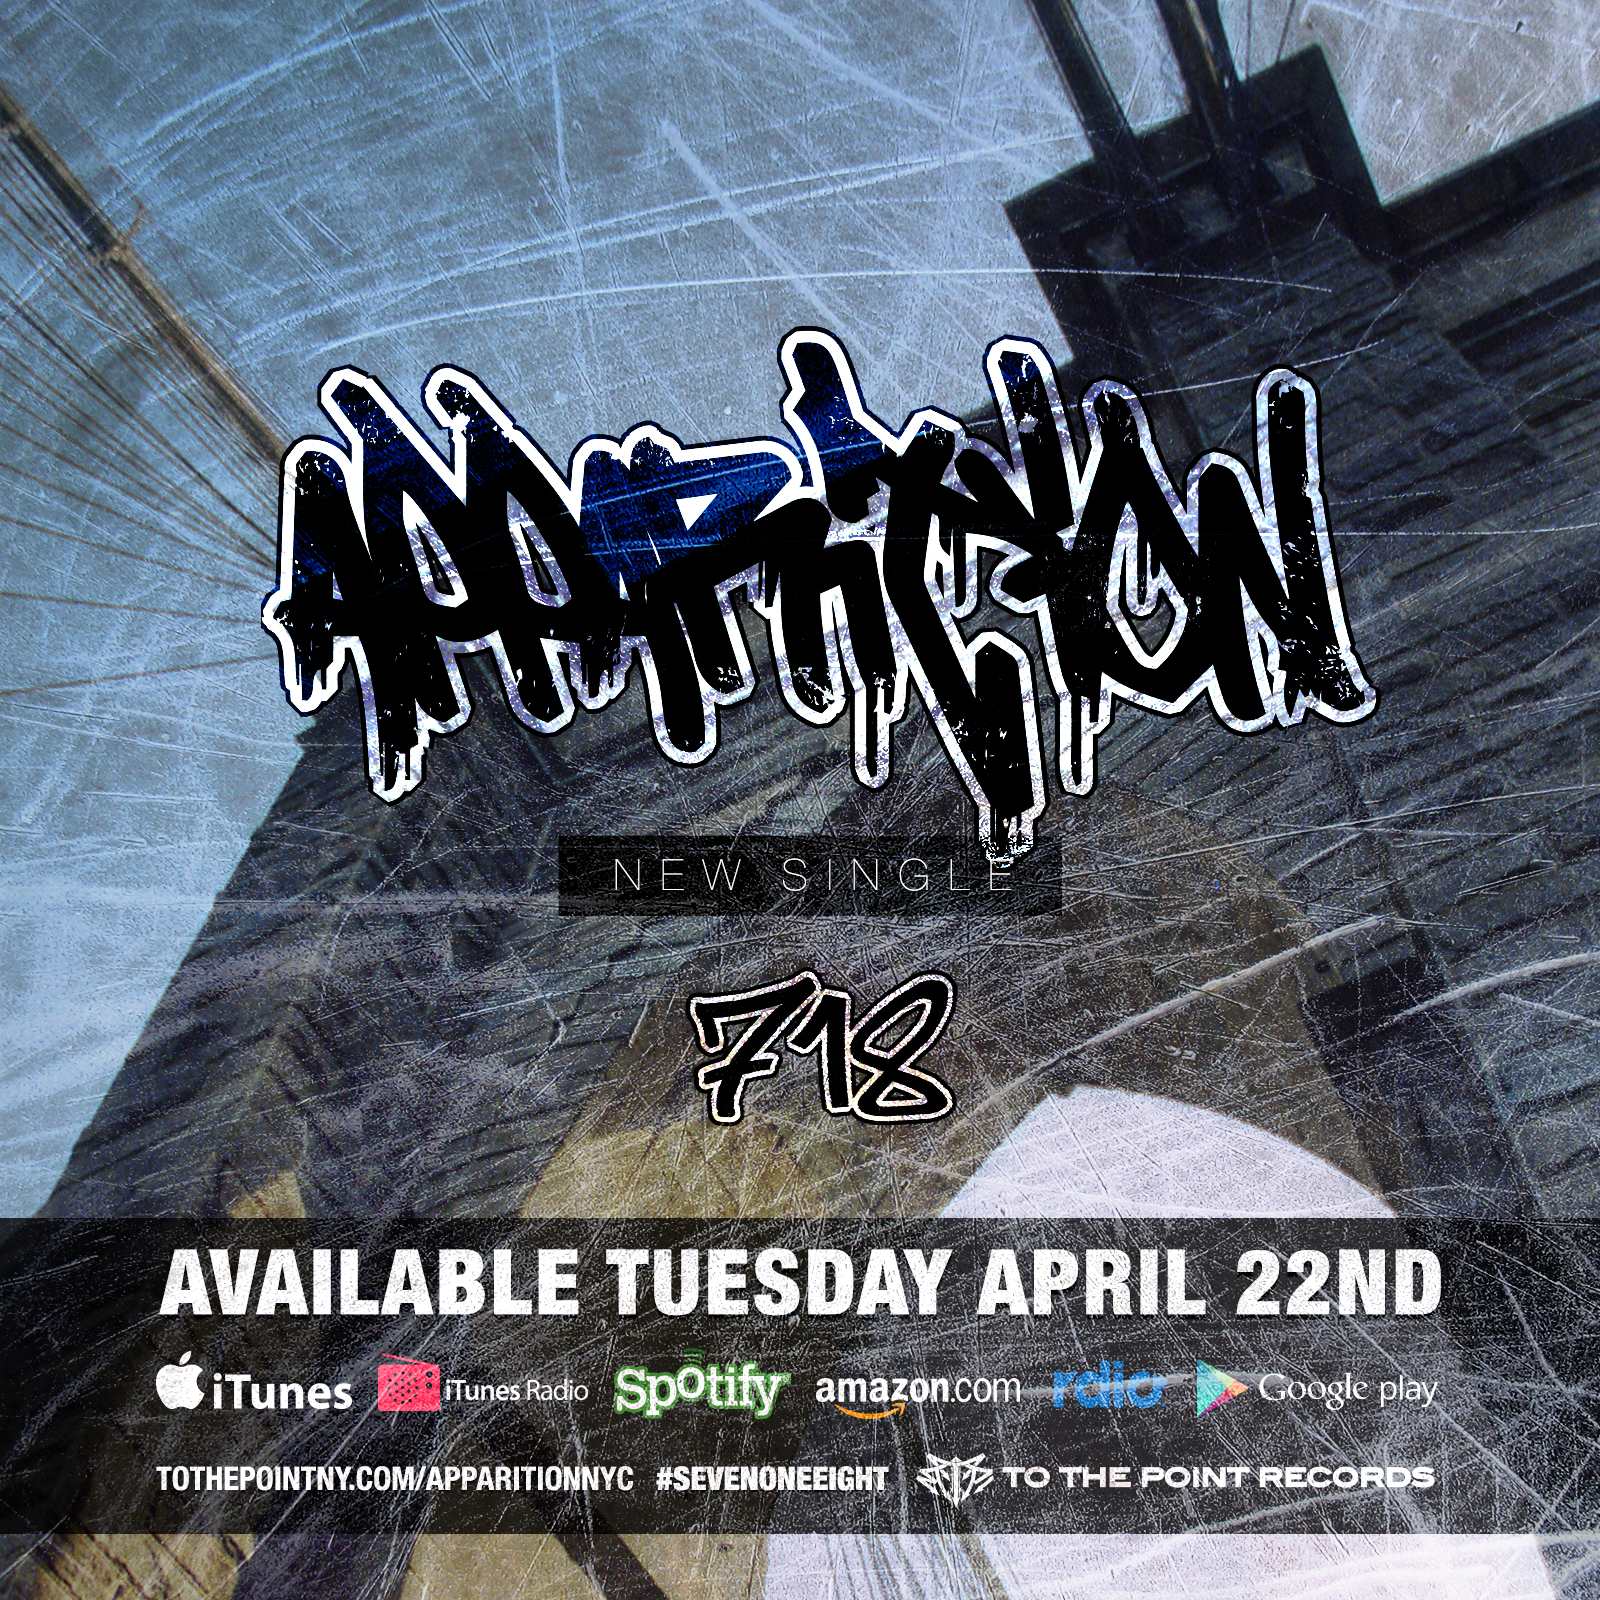 Apparition new single "718" available April 22nd, 2014 through To The Point Records. Available on iTunes, Amazon, Spotify & more.